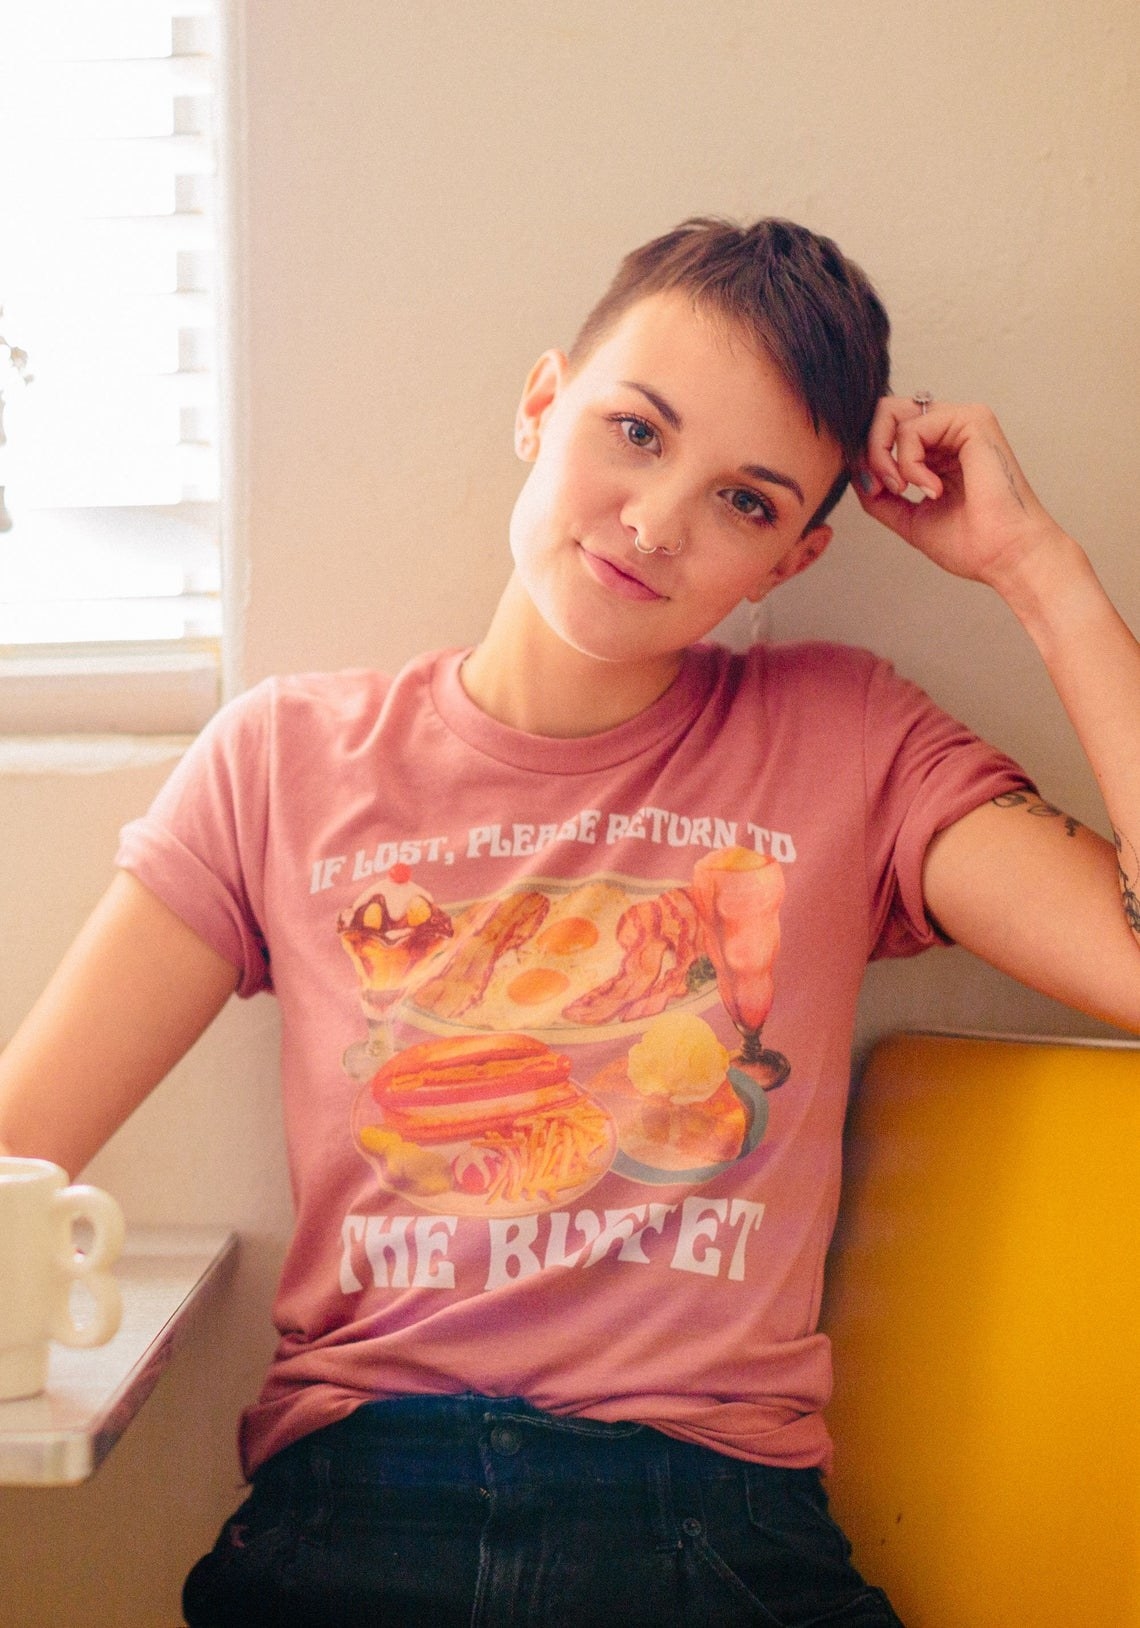 Model wearing faded style shirt that says &quot;If lost, please return to the buffet&quot; with old school images of several different meals and desserts including a hot dog and fries, pie, milkshake, sundae, and bacon and eggs 